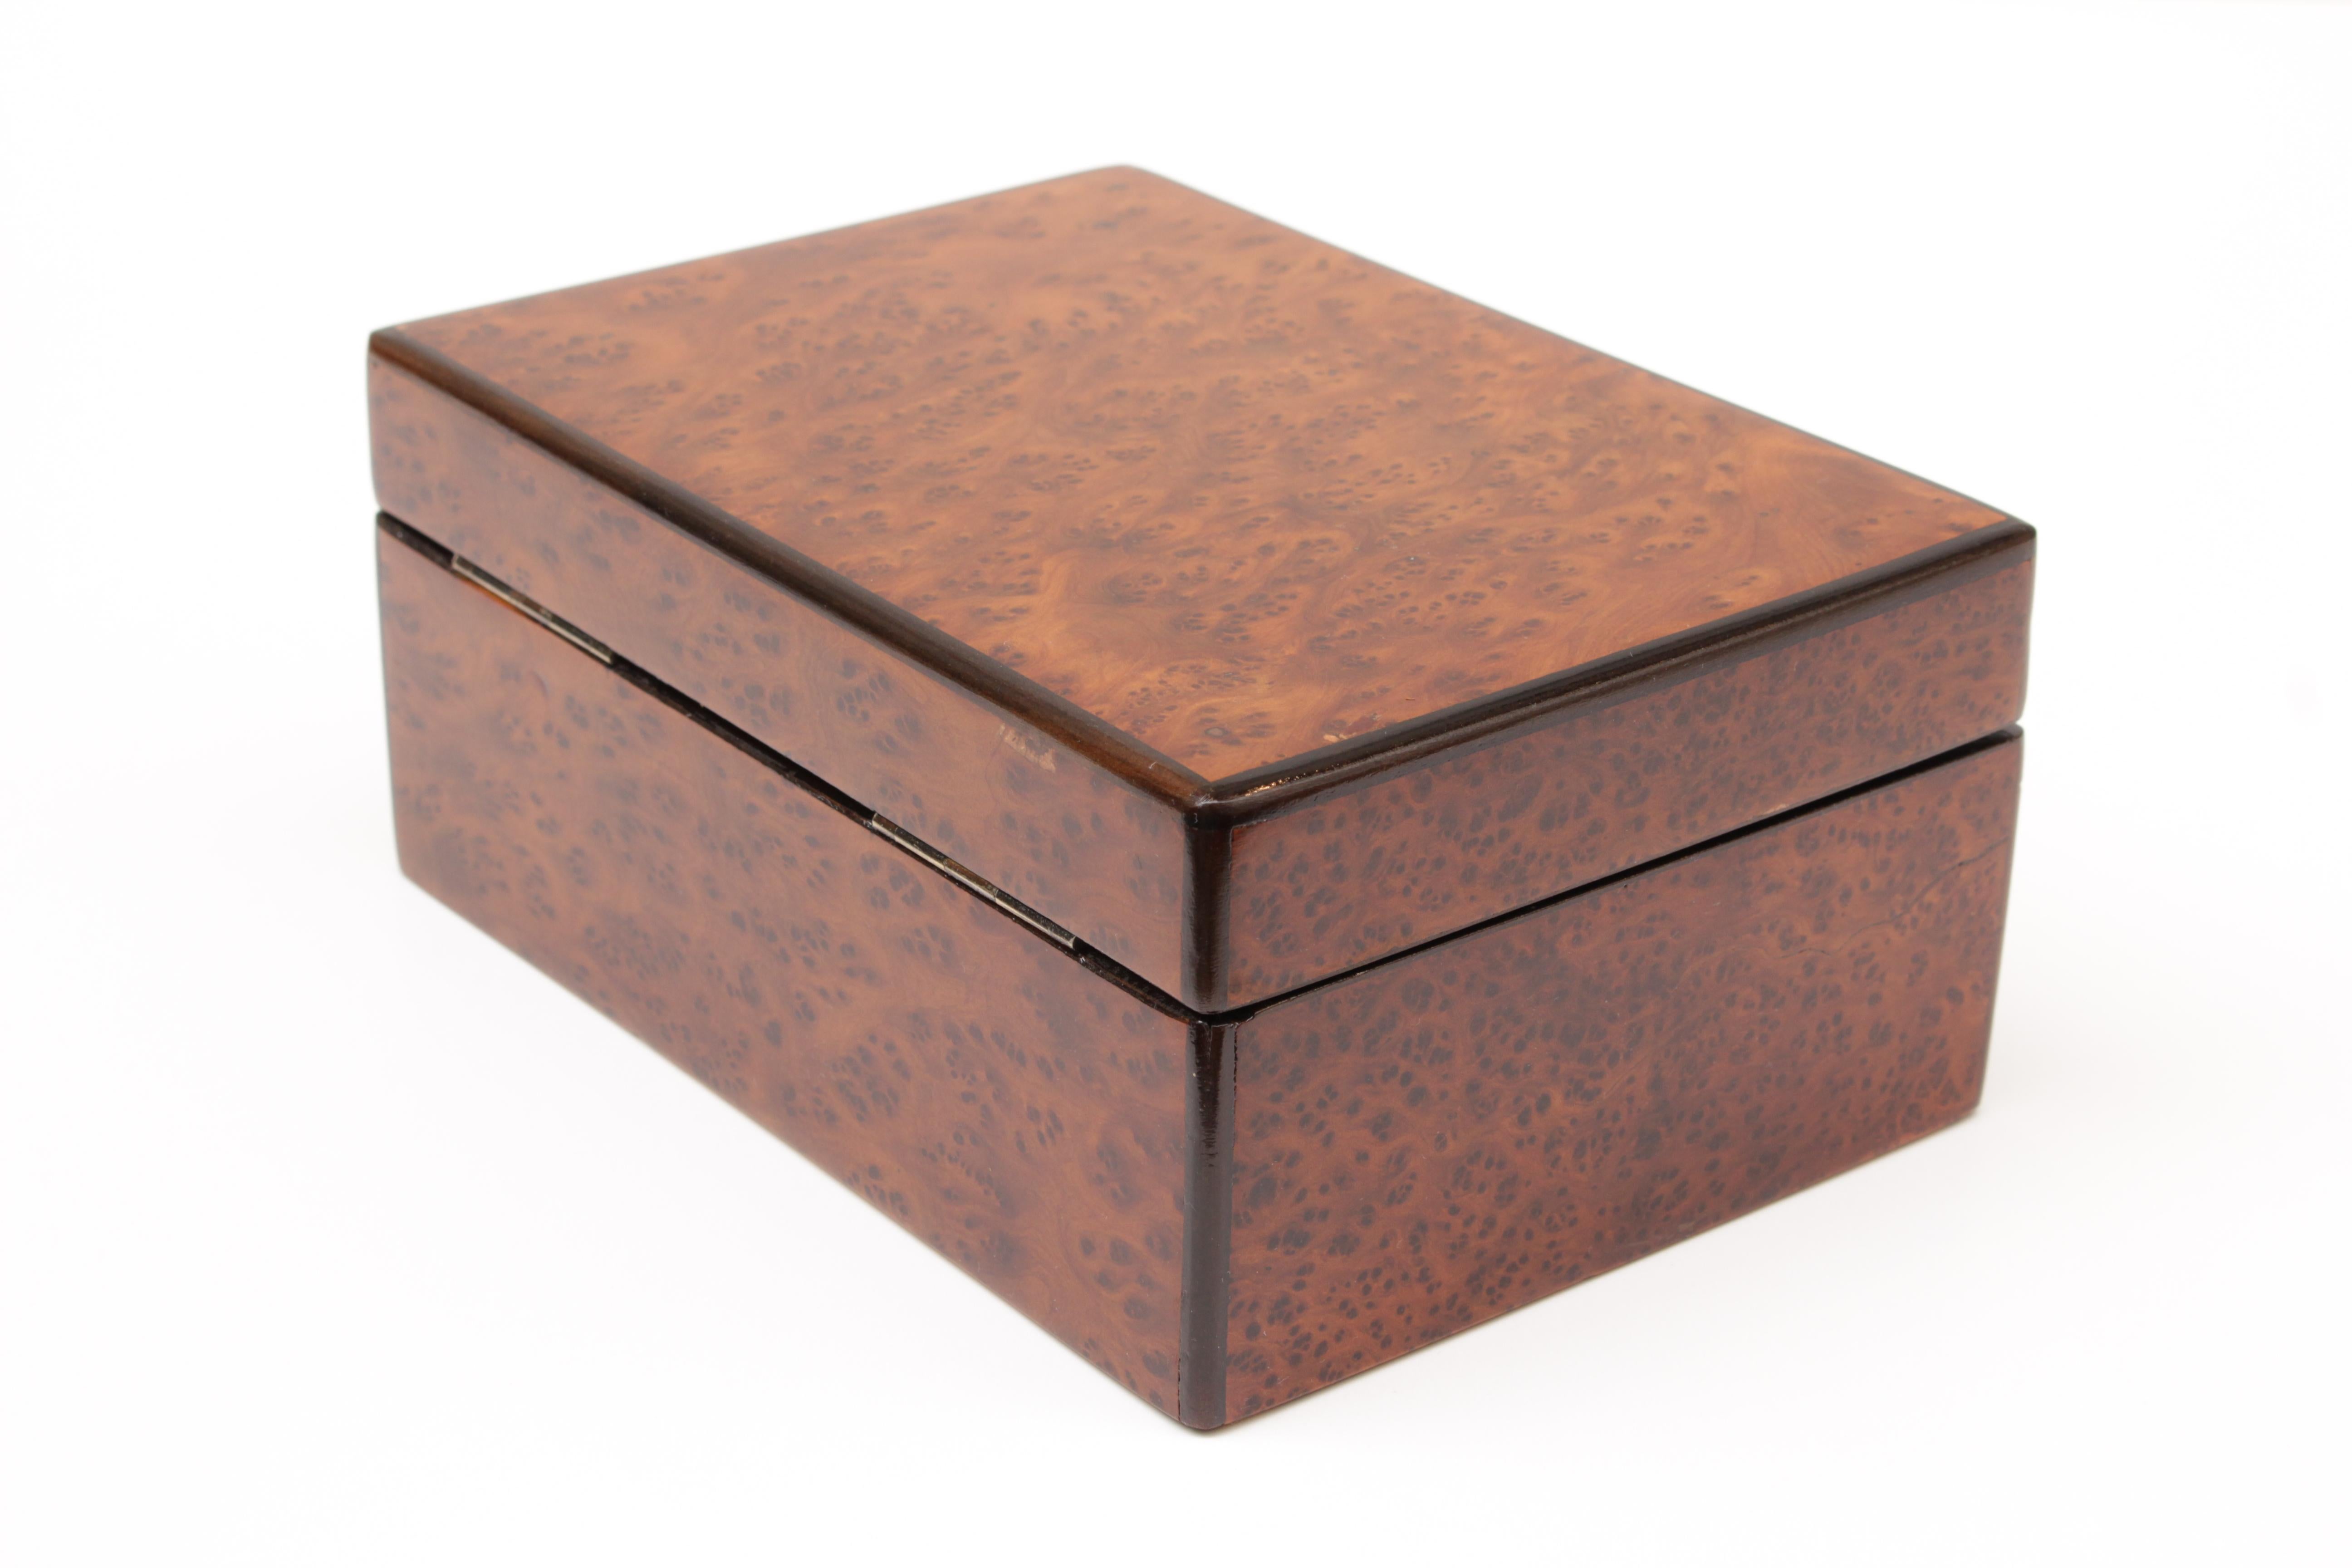 Very beautiful small box from the time of Biedermeier, made of walnut root wood. In very good restored condition.